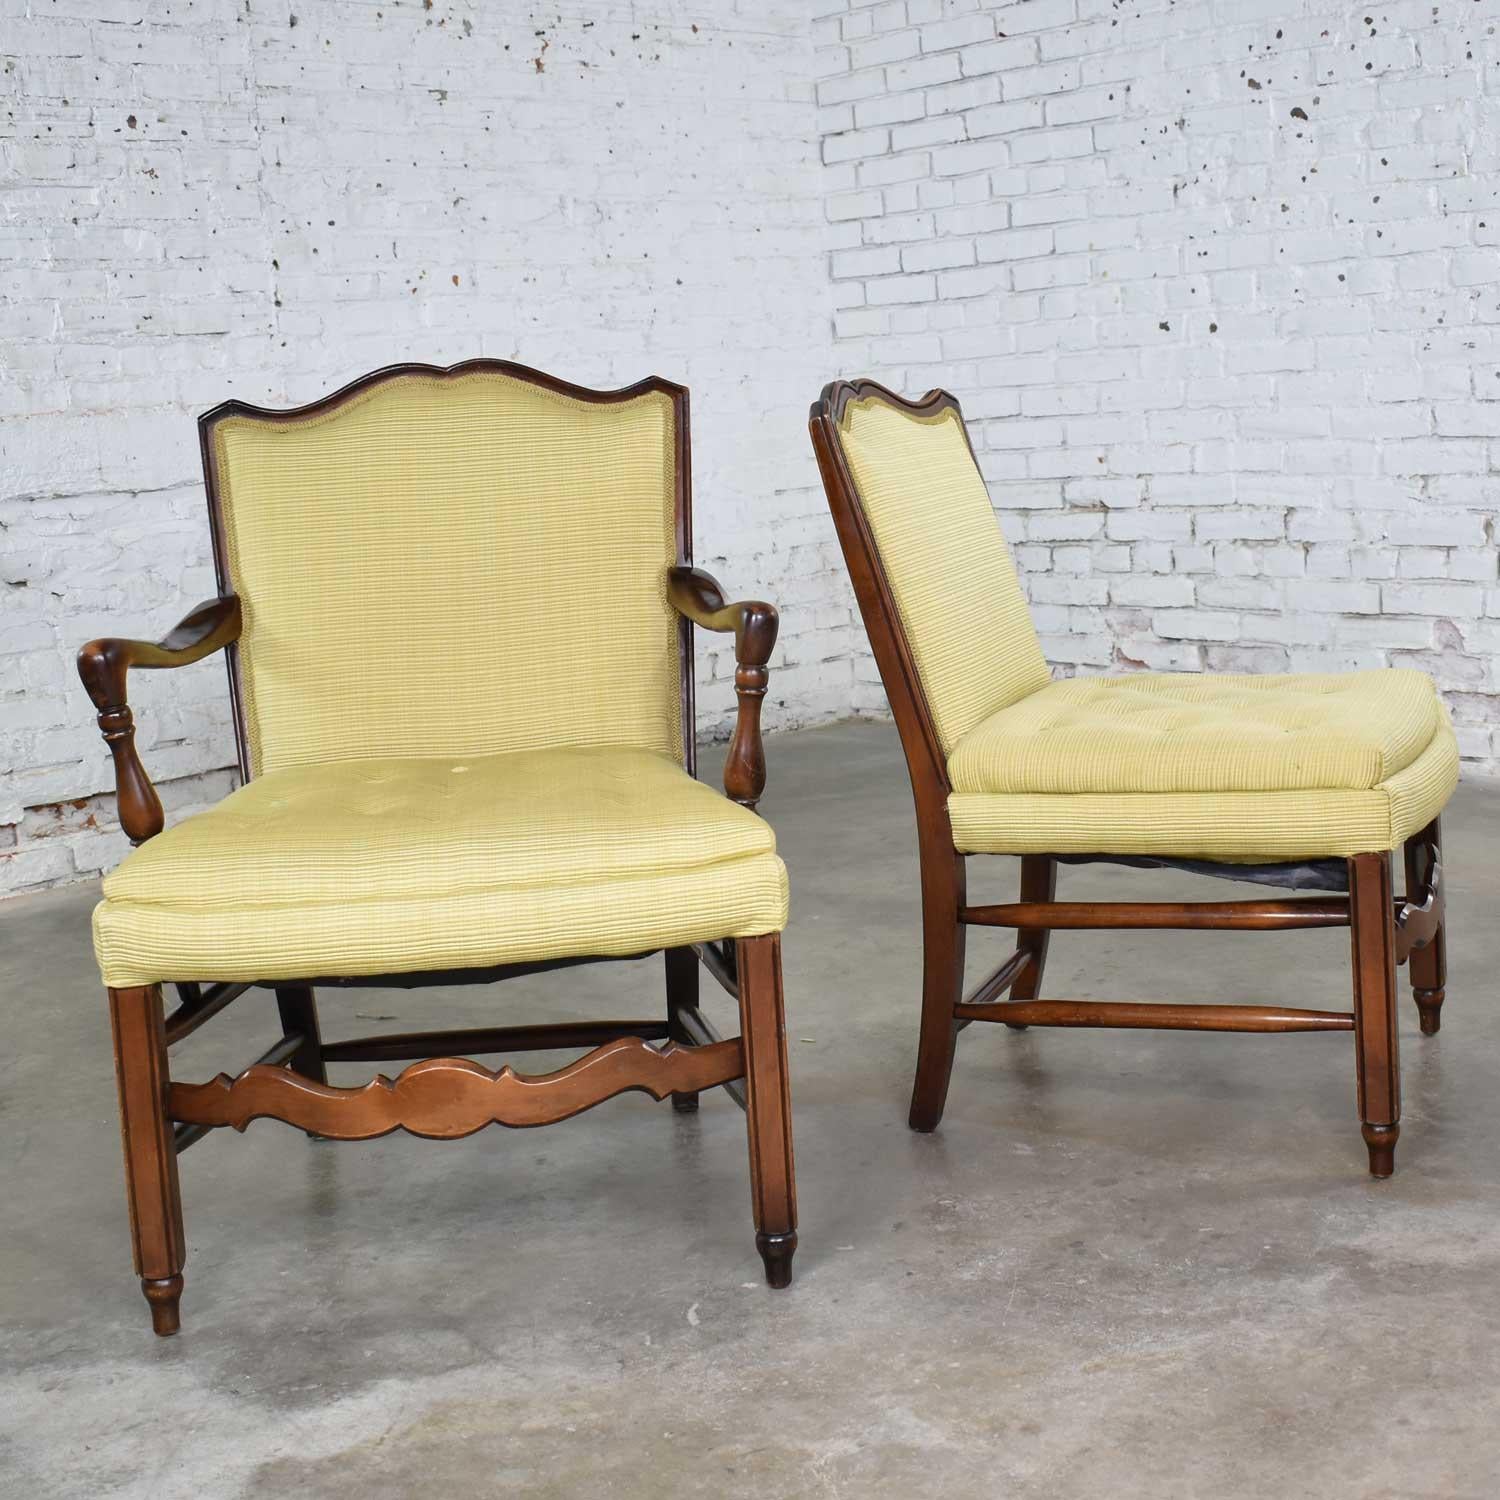 Handsome pair of Georgian Revival his and hers accent chairs in golden yellow upholstery. They are in wonderful recently recovered condition. The wood has nice wear and patina to their original finish. Please see photos, circa mid-20th